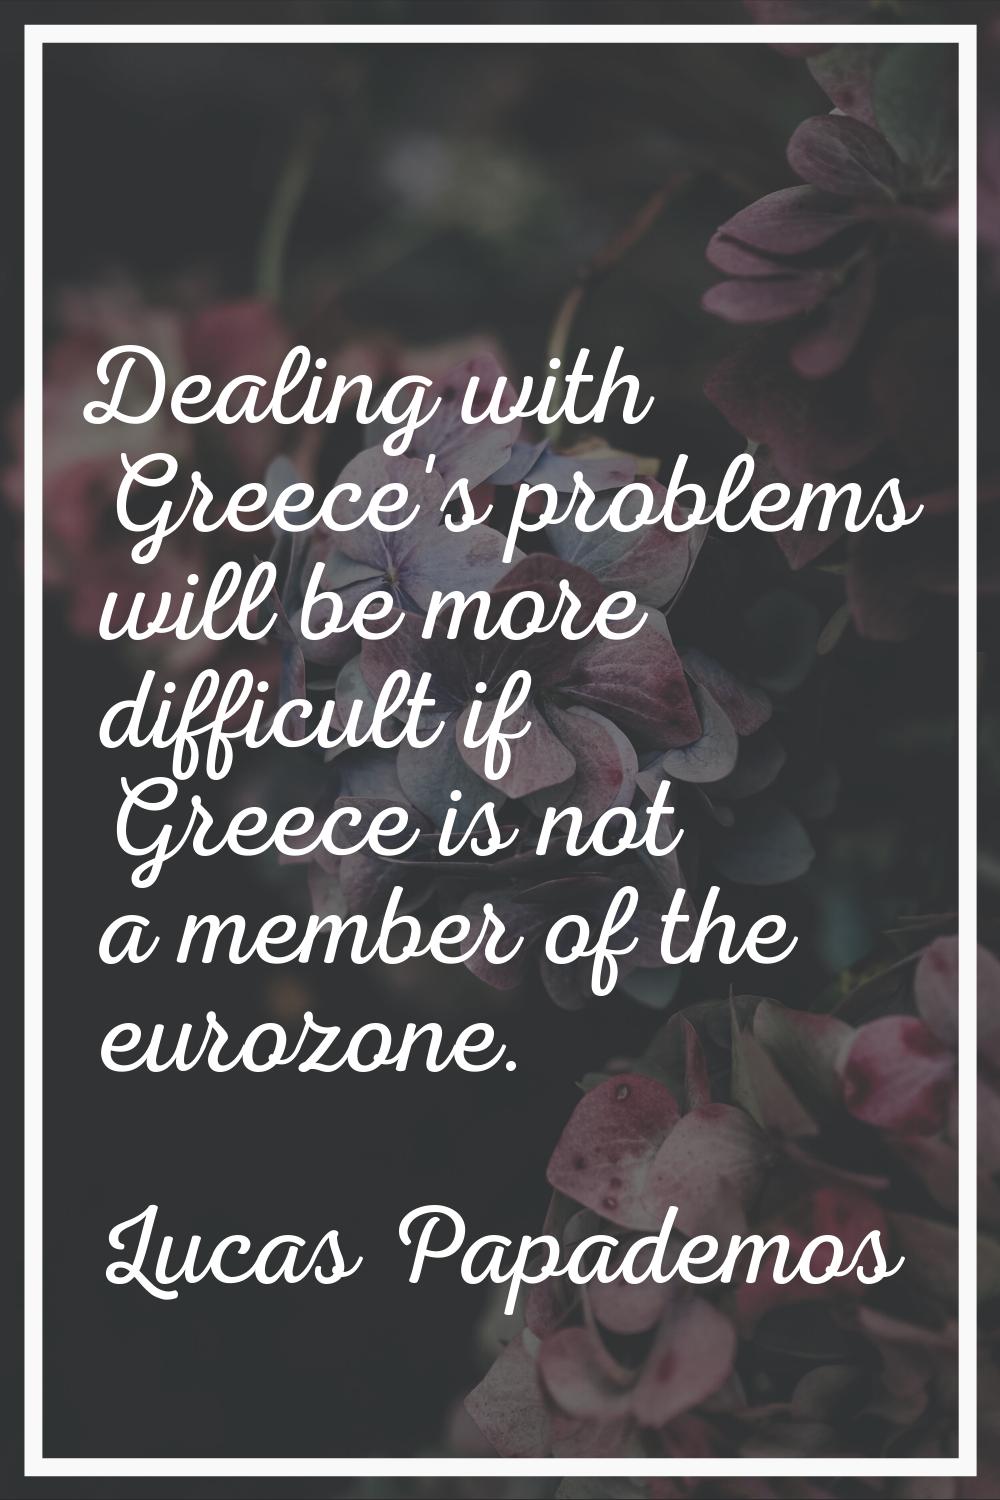 Dealing with Greece's problems will be more difficult if Greece is not a member of the eurozone.